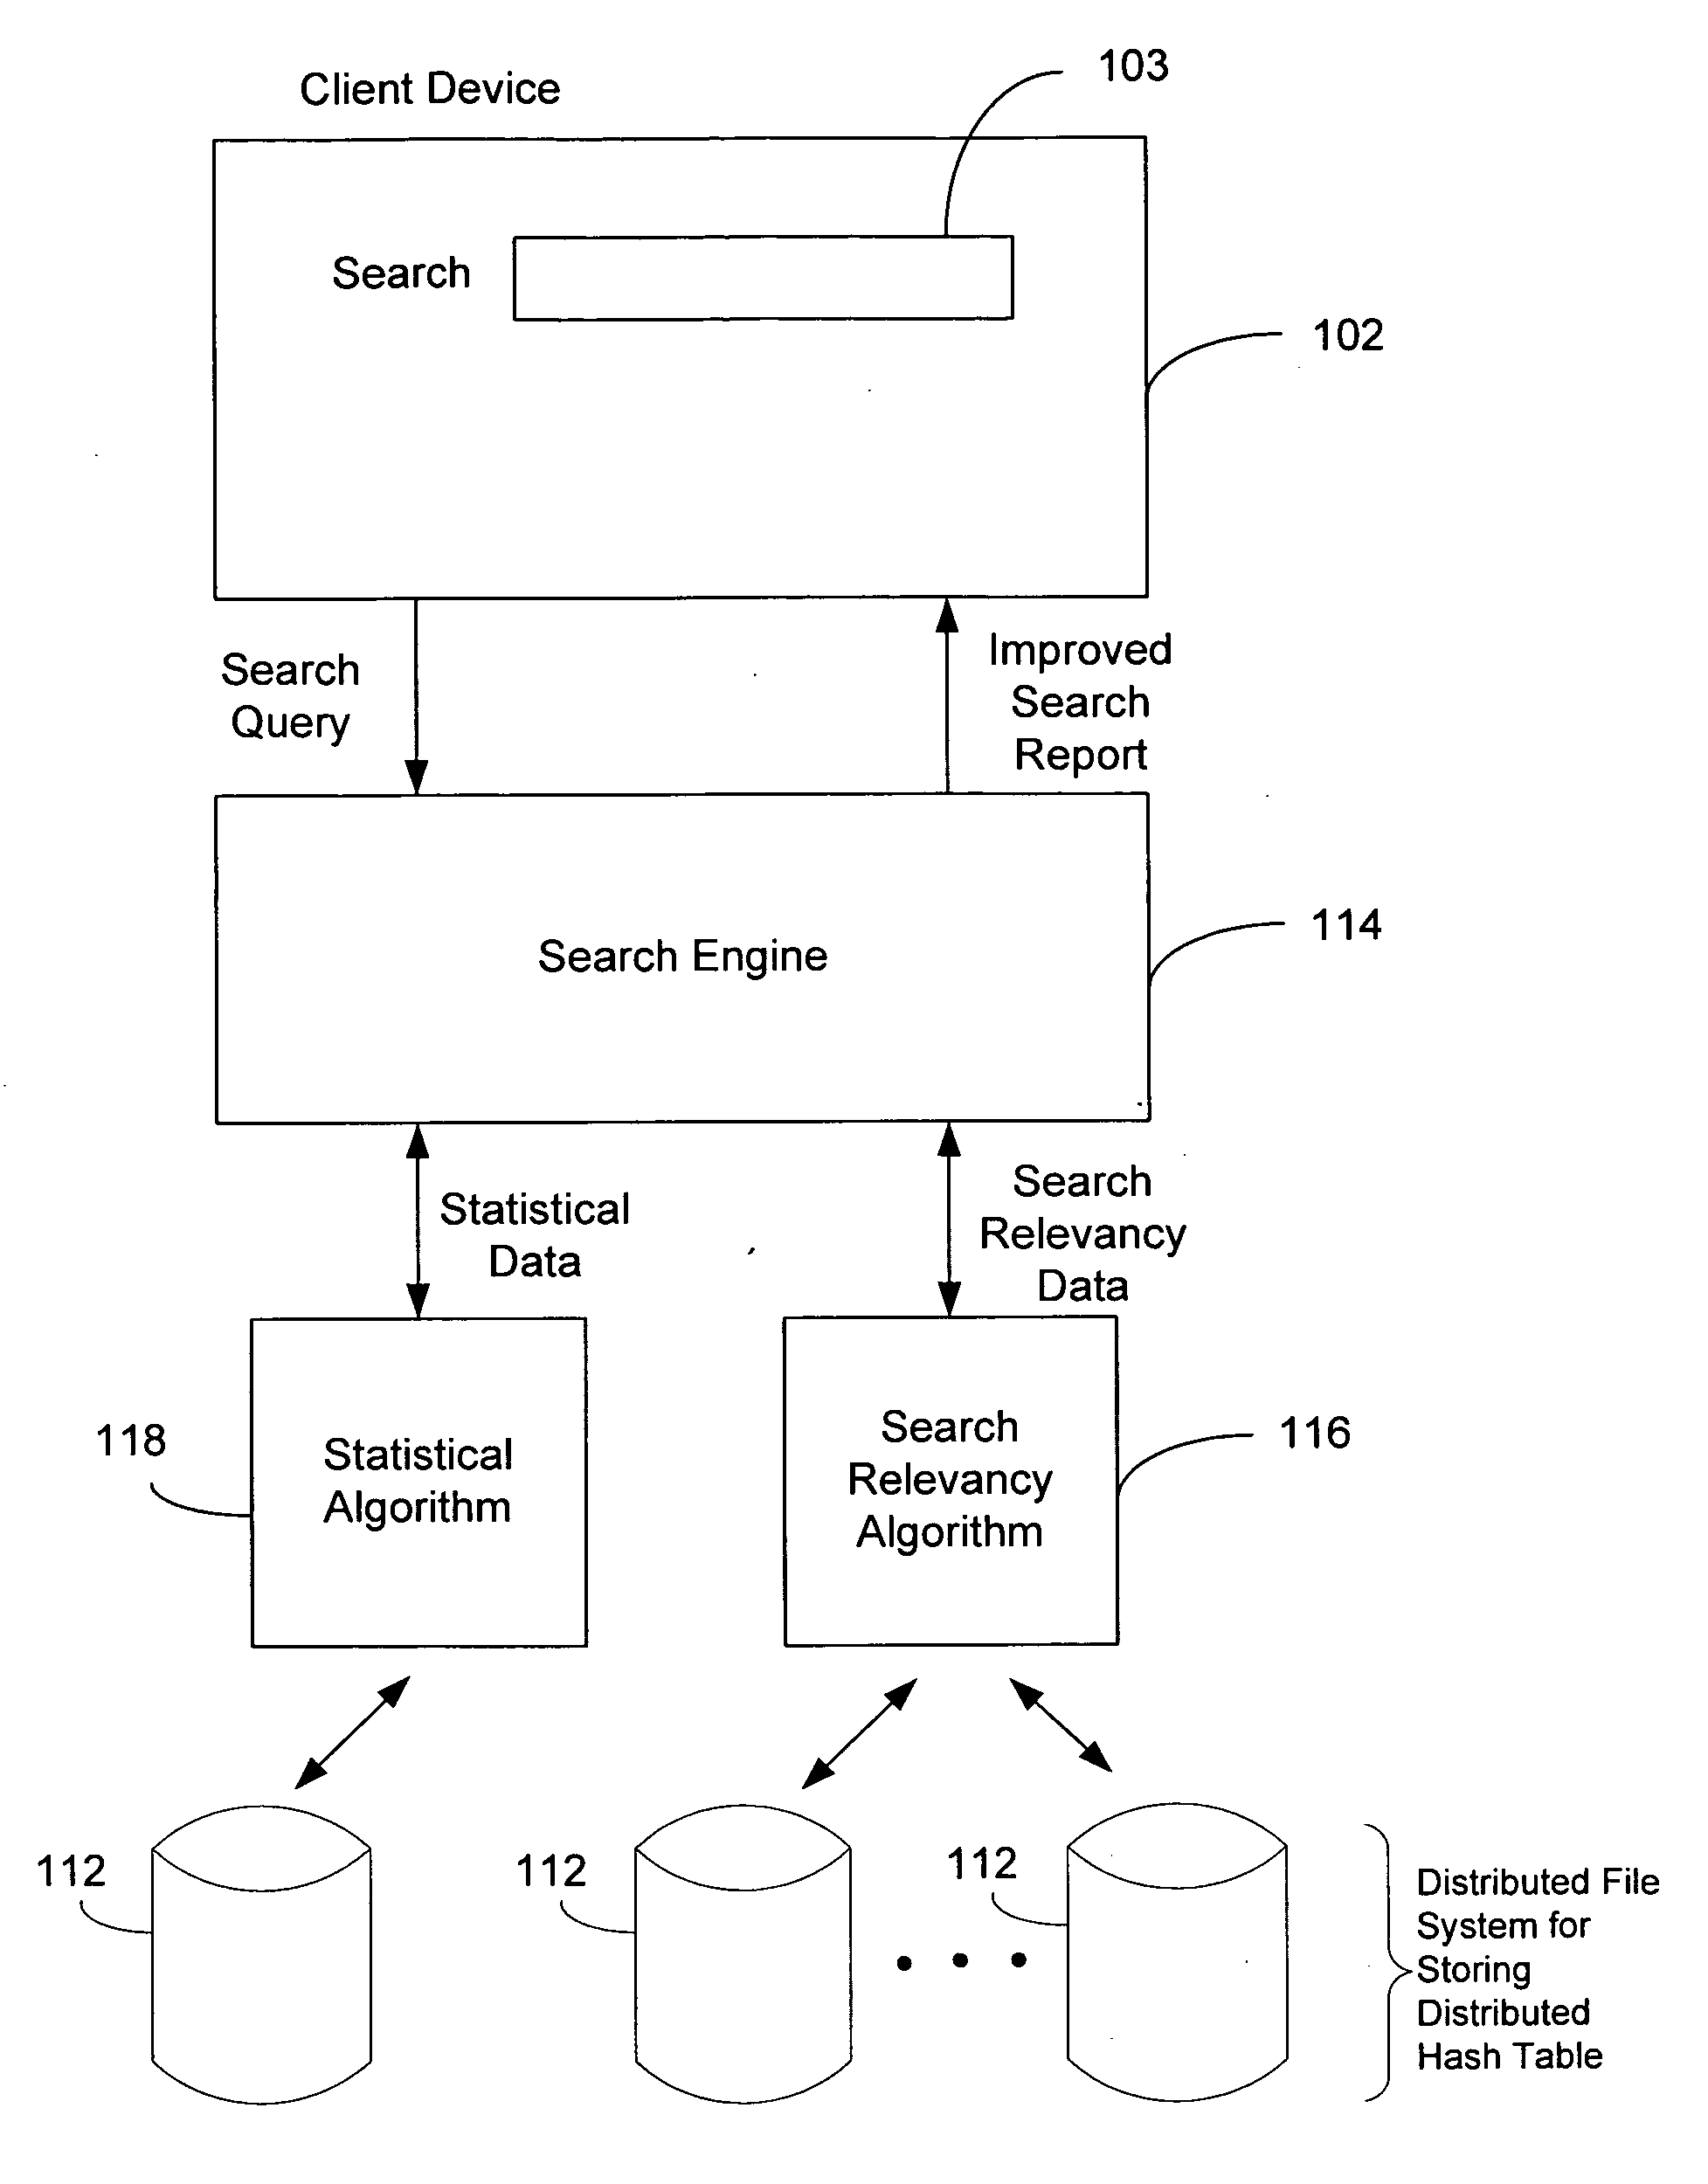 Method and apparatus for creating user-generated document feedback to improve search relevancy